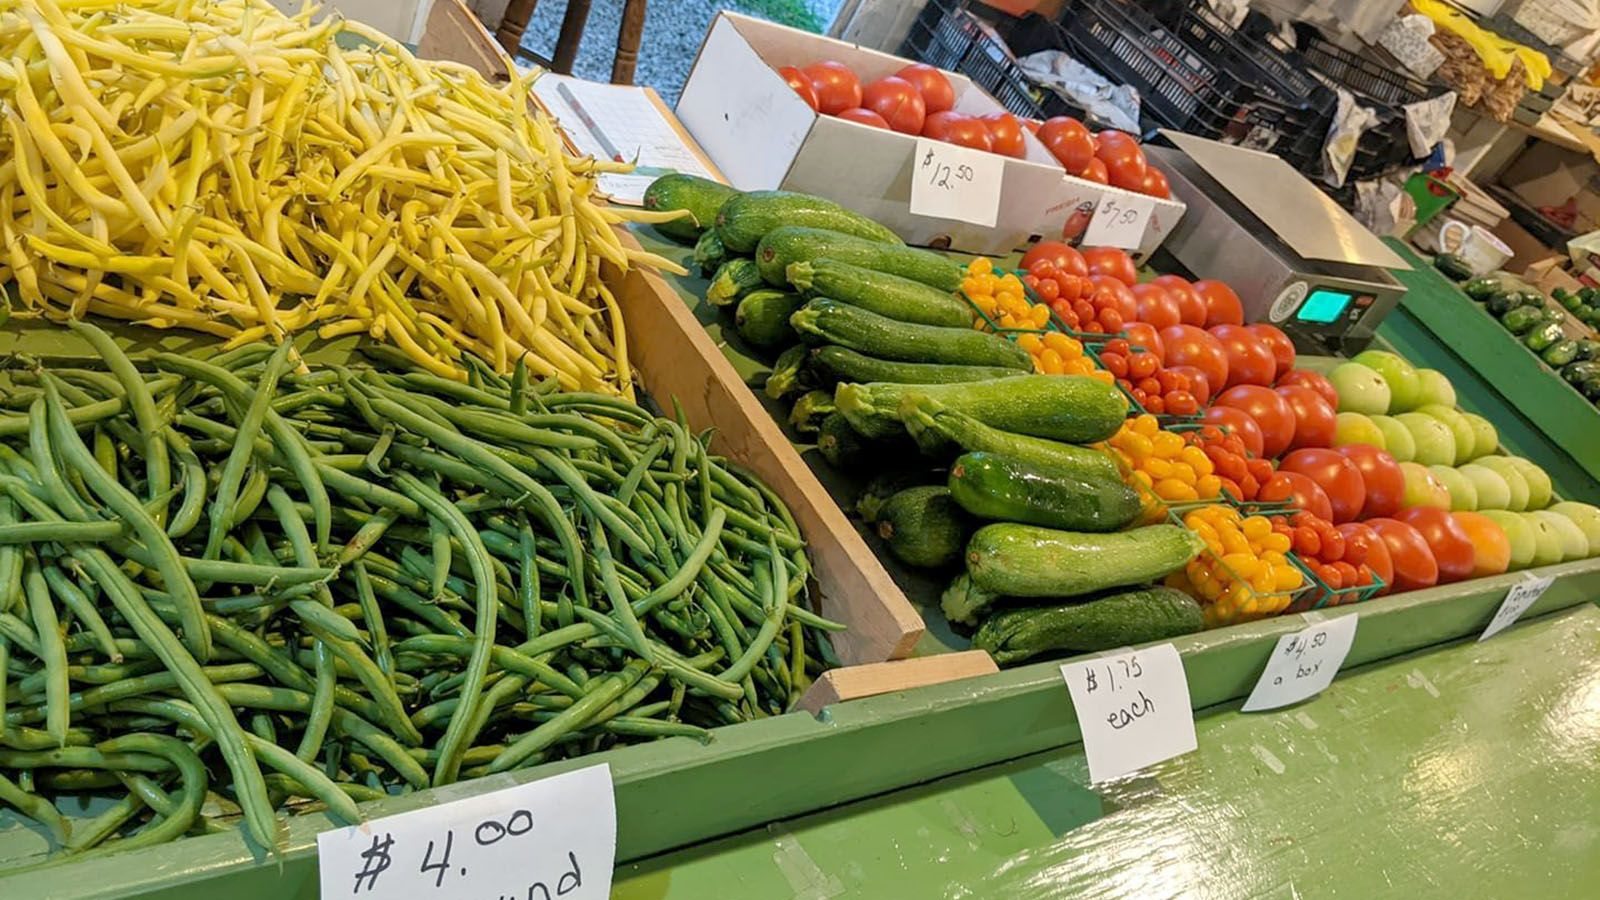 South Side Farmers Market opens for their 97th season on April 8.